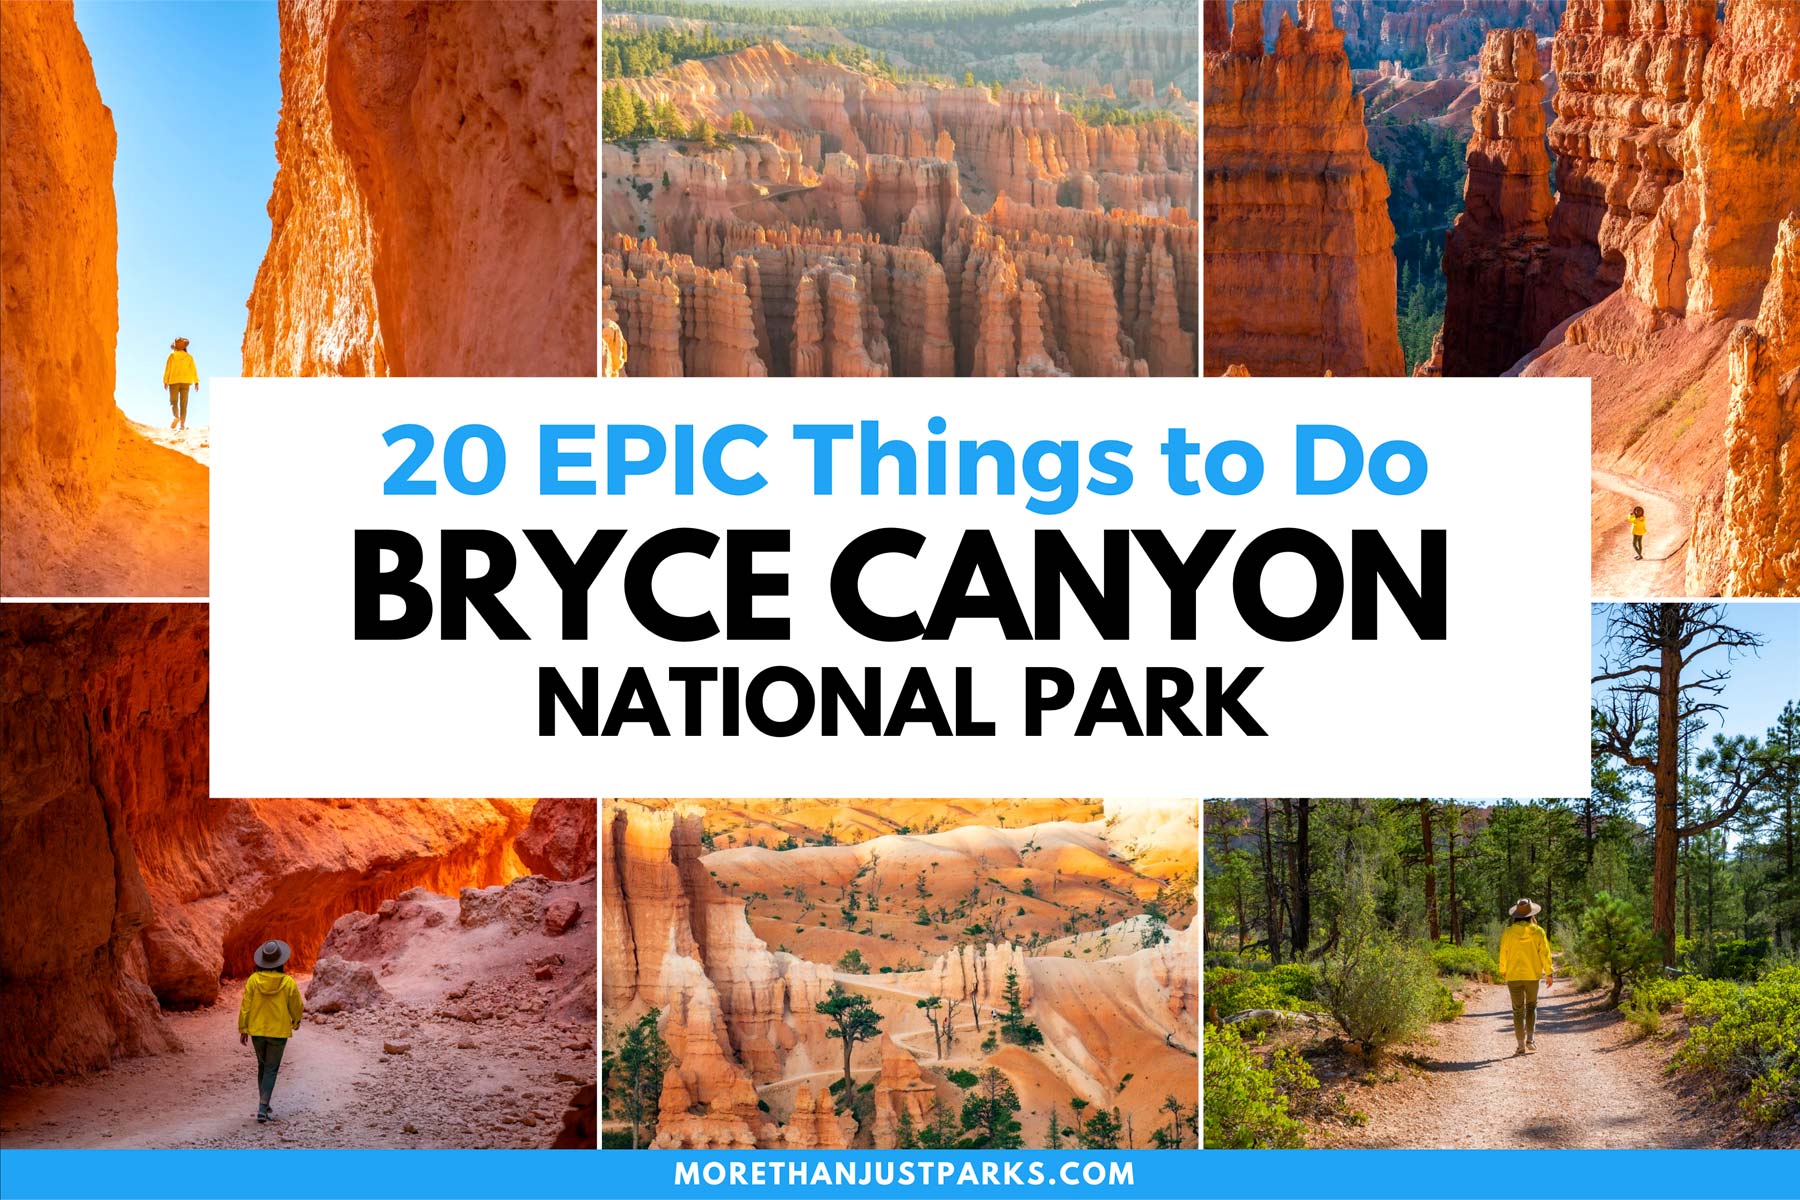 20 EPIC Things to Do at Bryce Canyon National Park on Your Visit